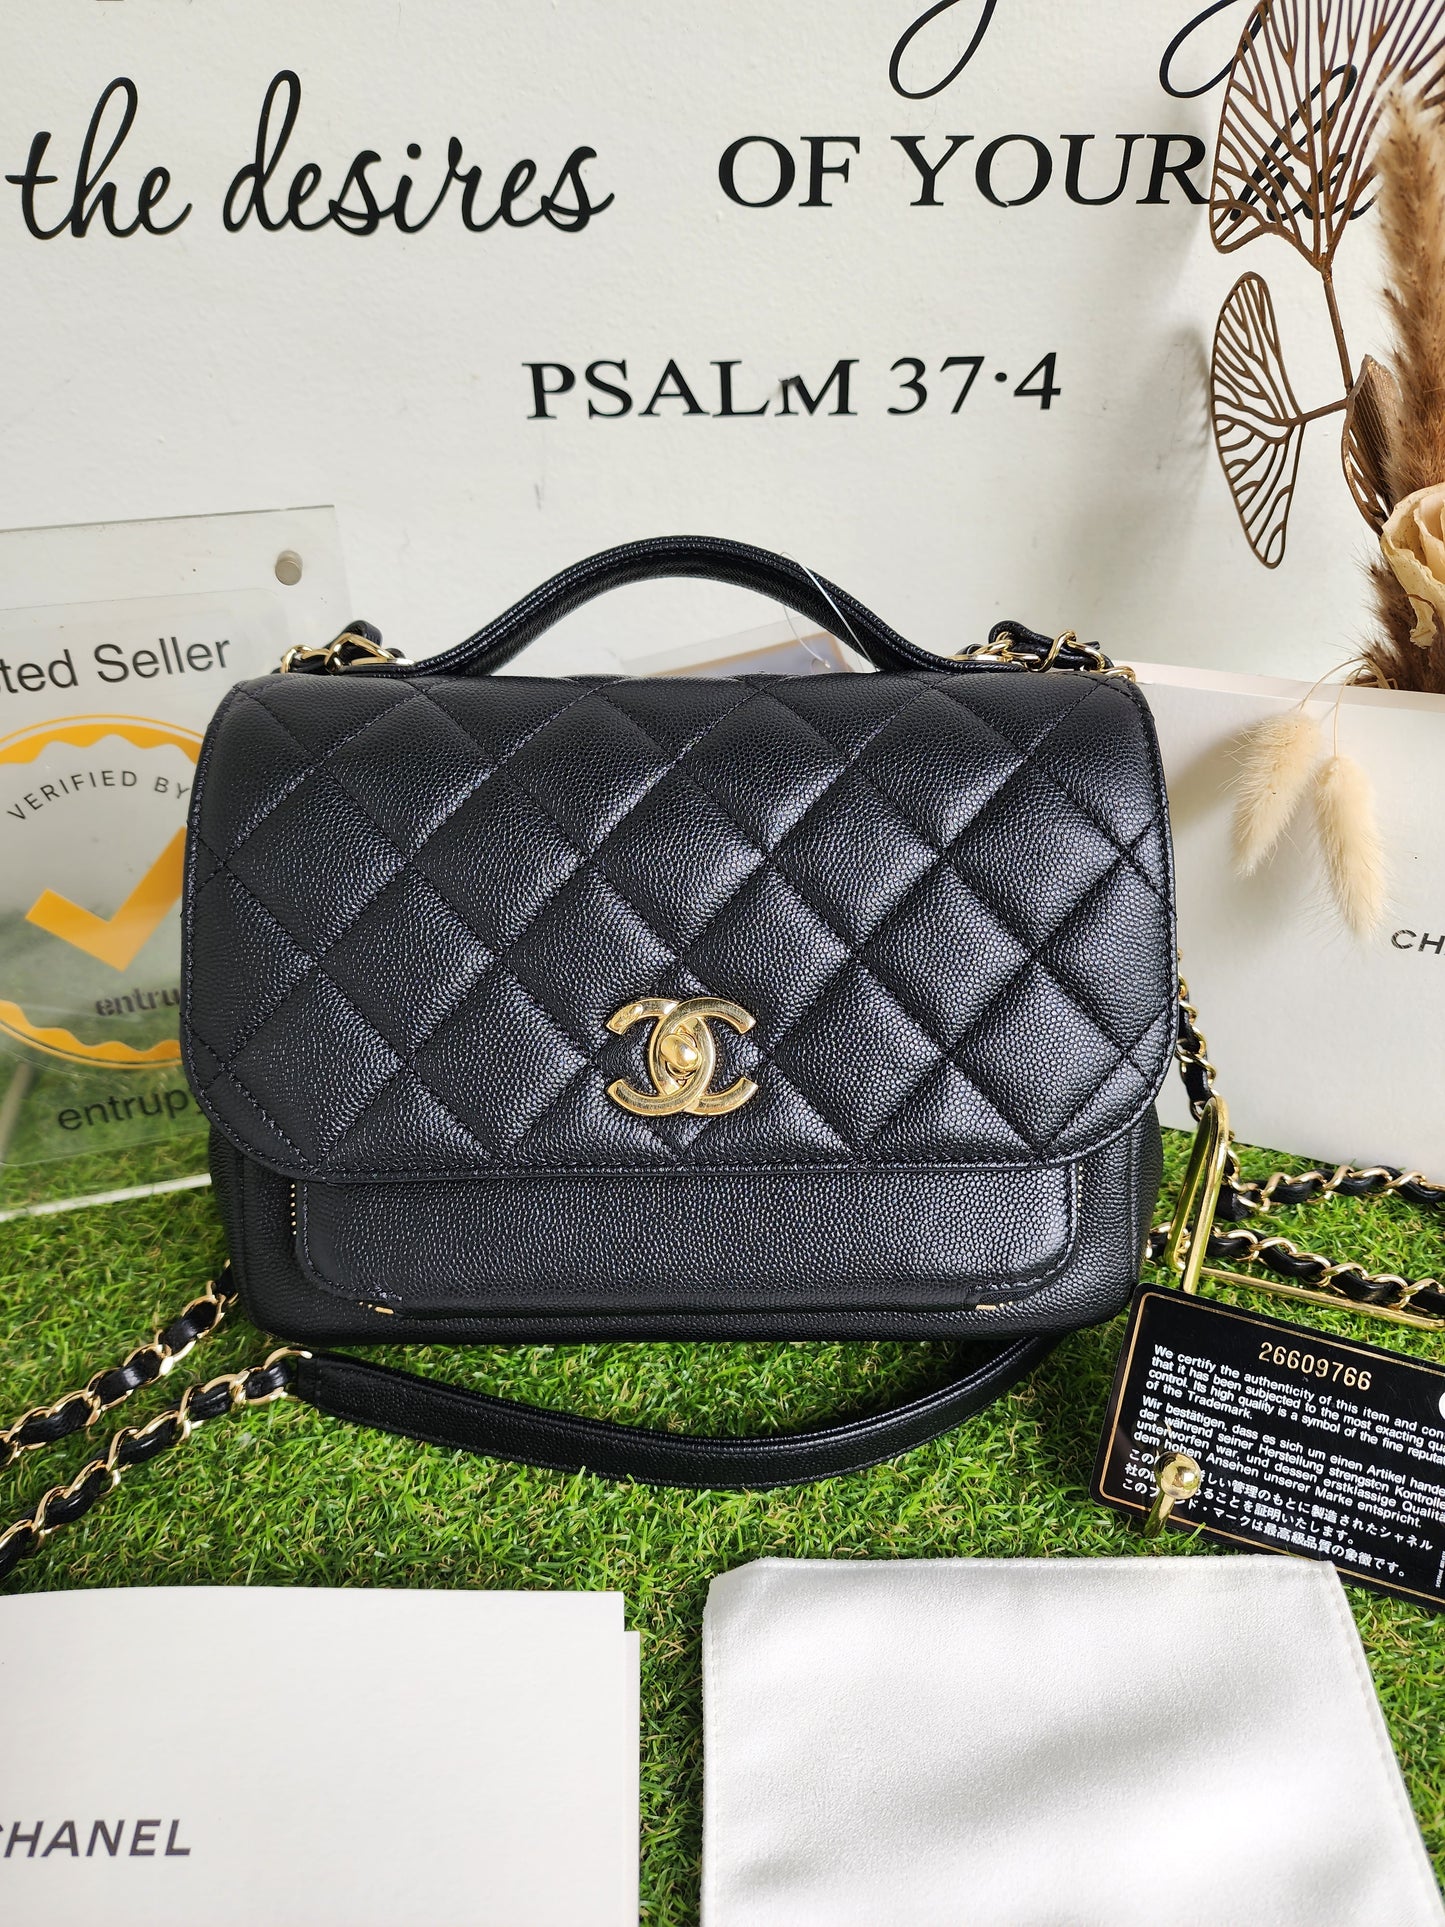 CHANEL BUSINESS AFFINITY SMALL